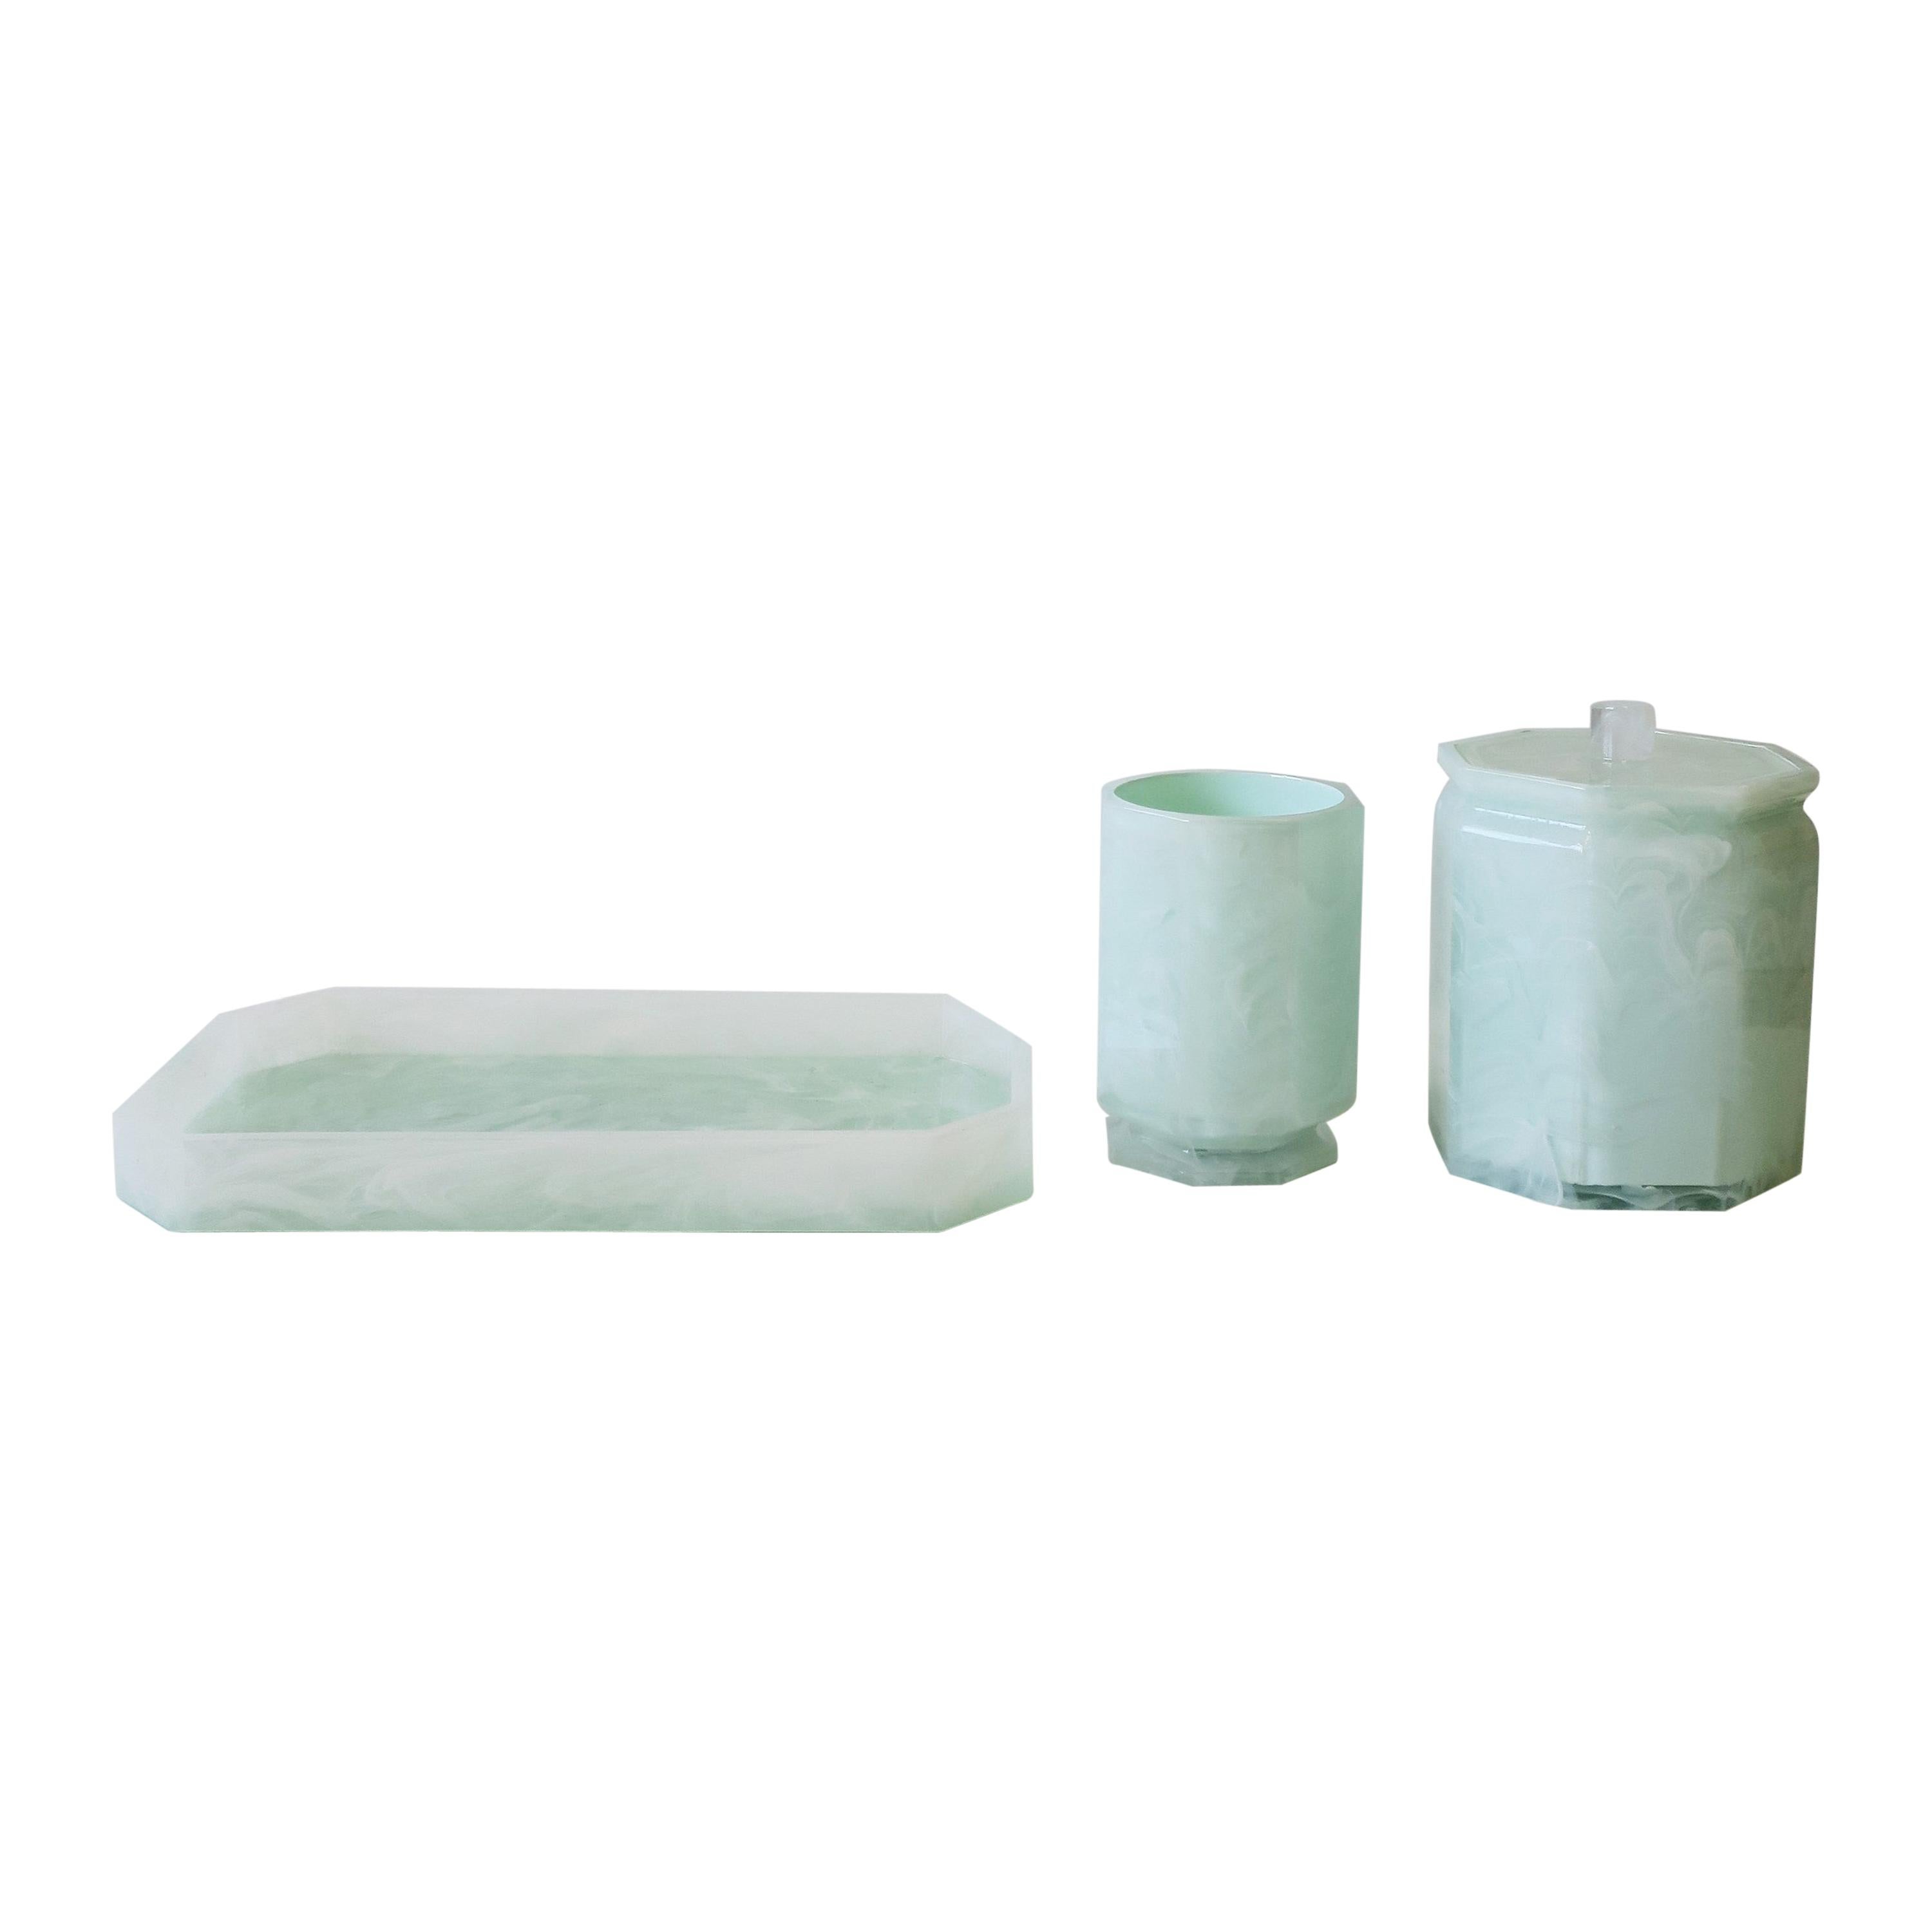 Marble Acrylic Desk or Vanity Tray Box Set in White and Mint Green